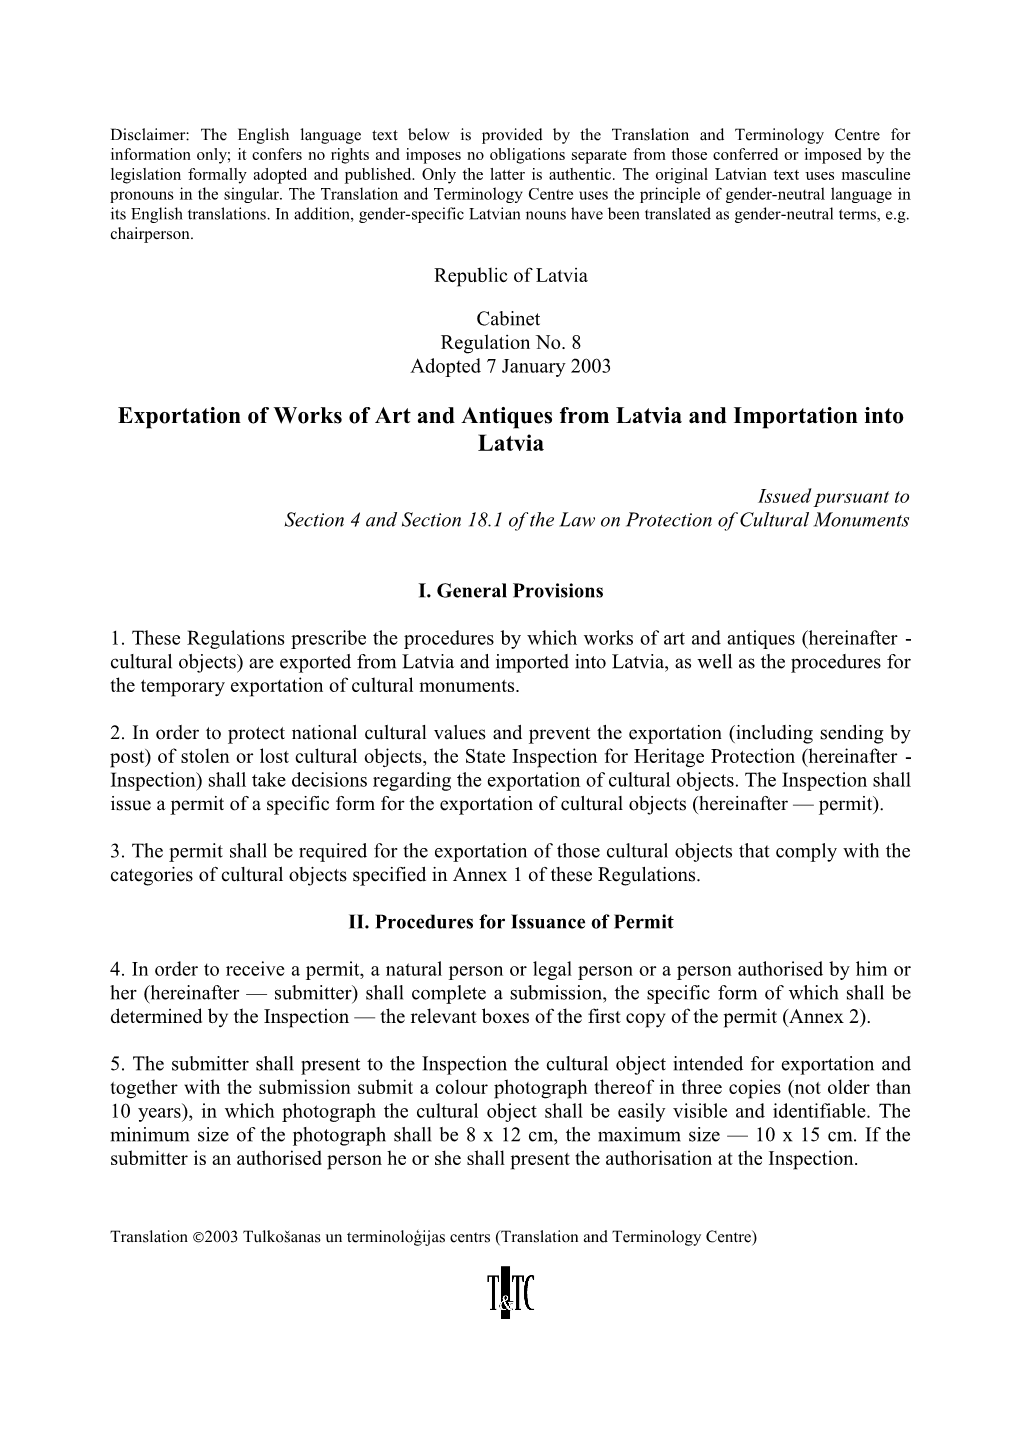 Exportation of Works of Art and Antiques from Latvia and Importation Into Latvia